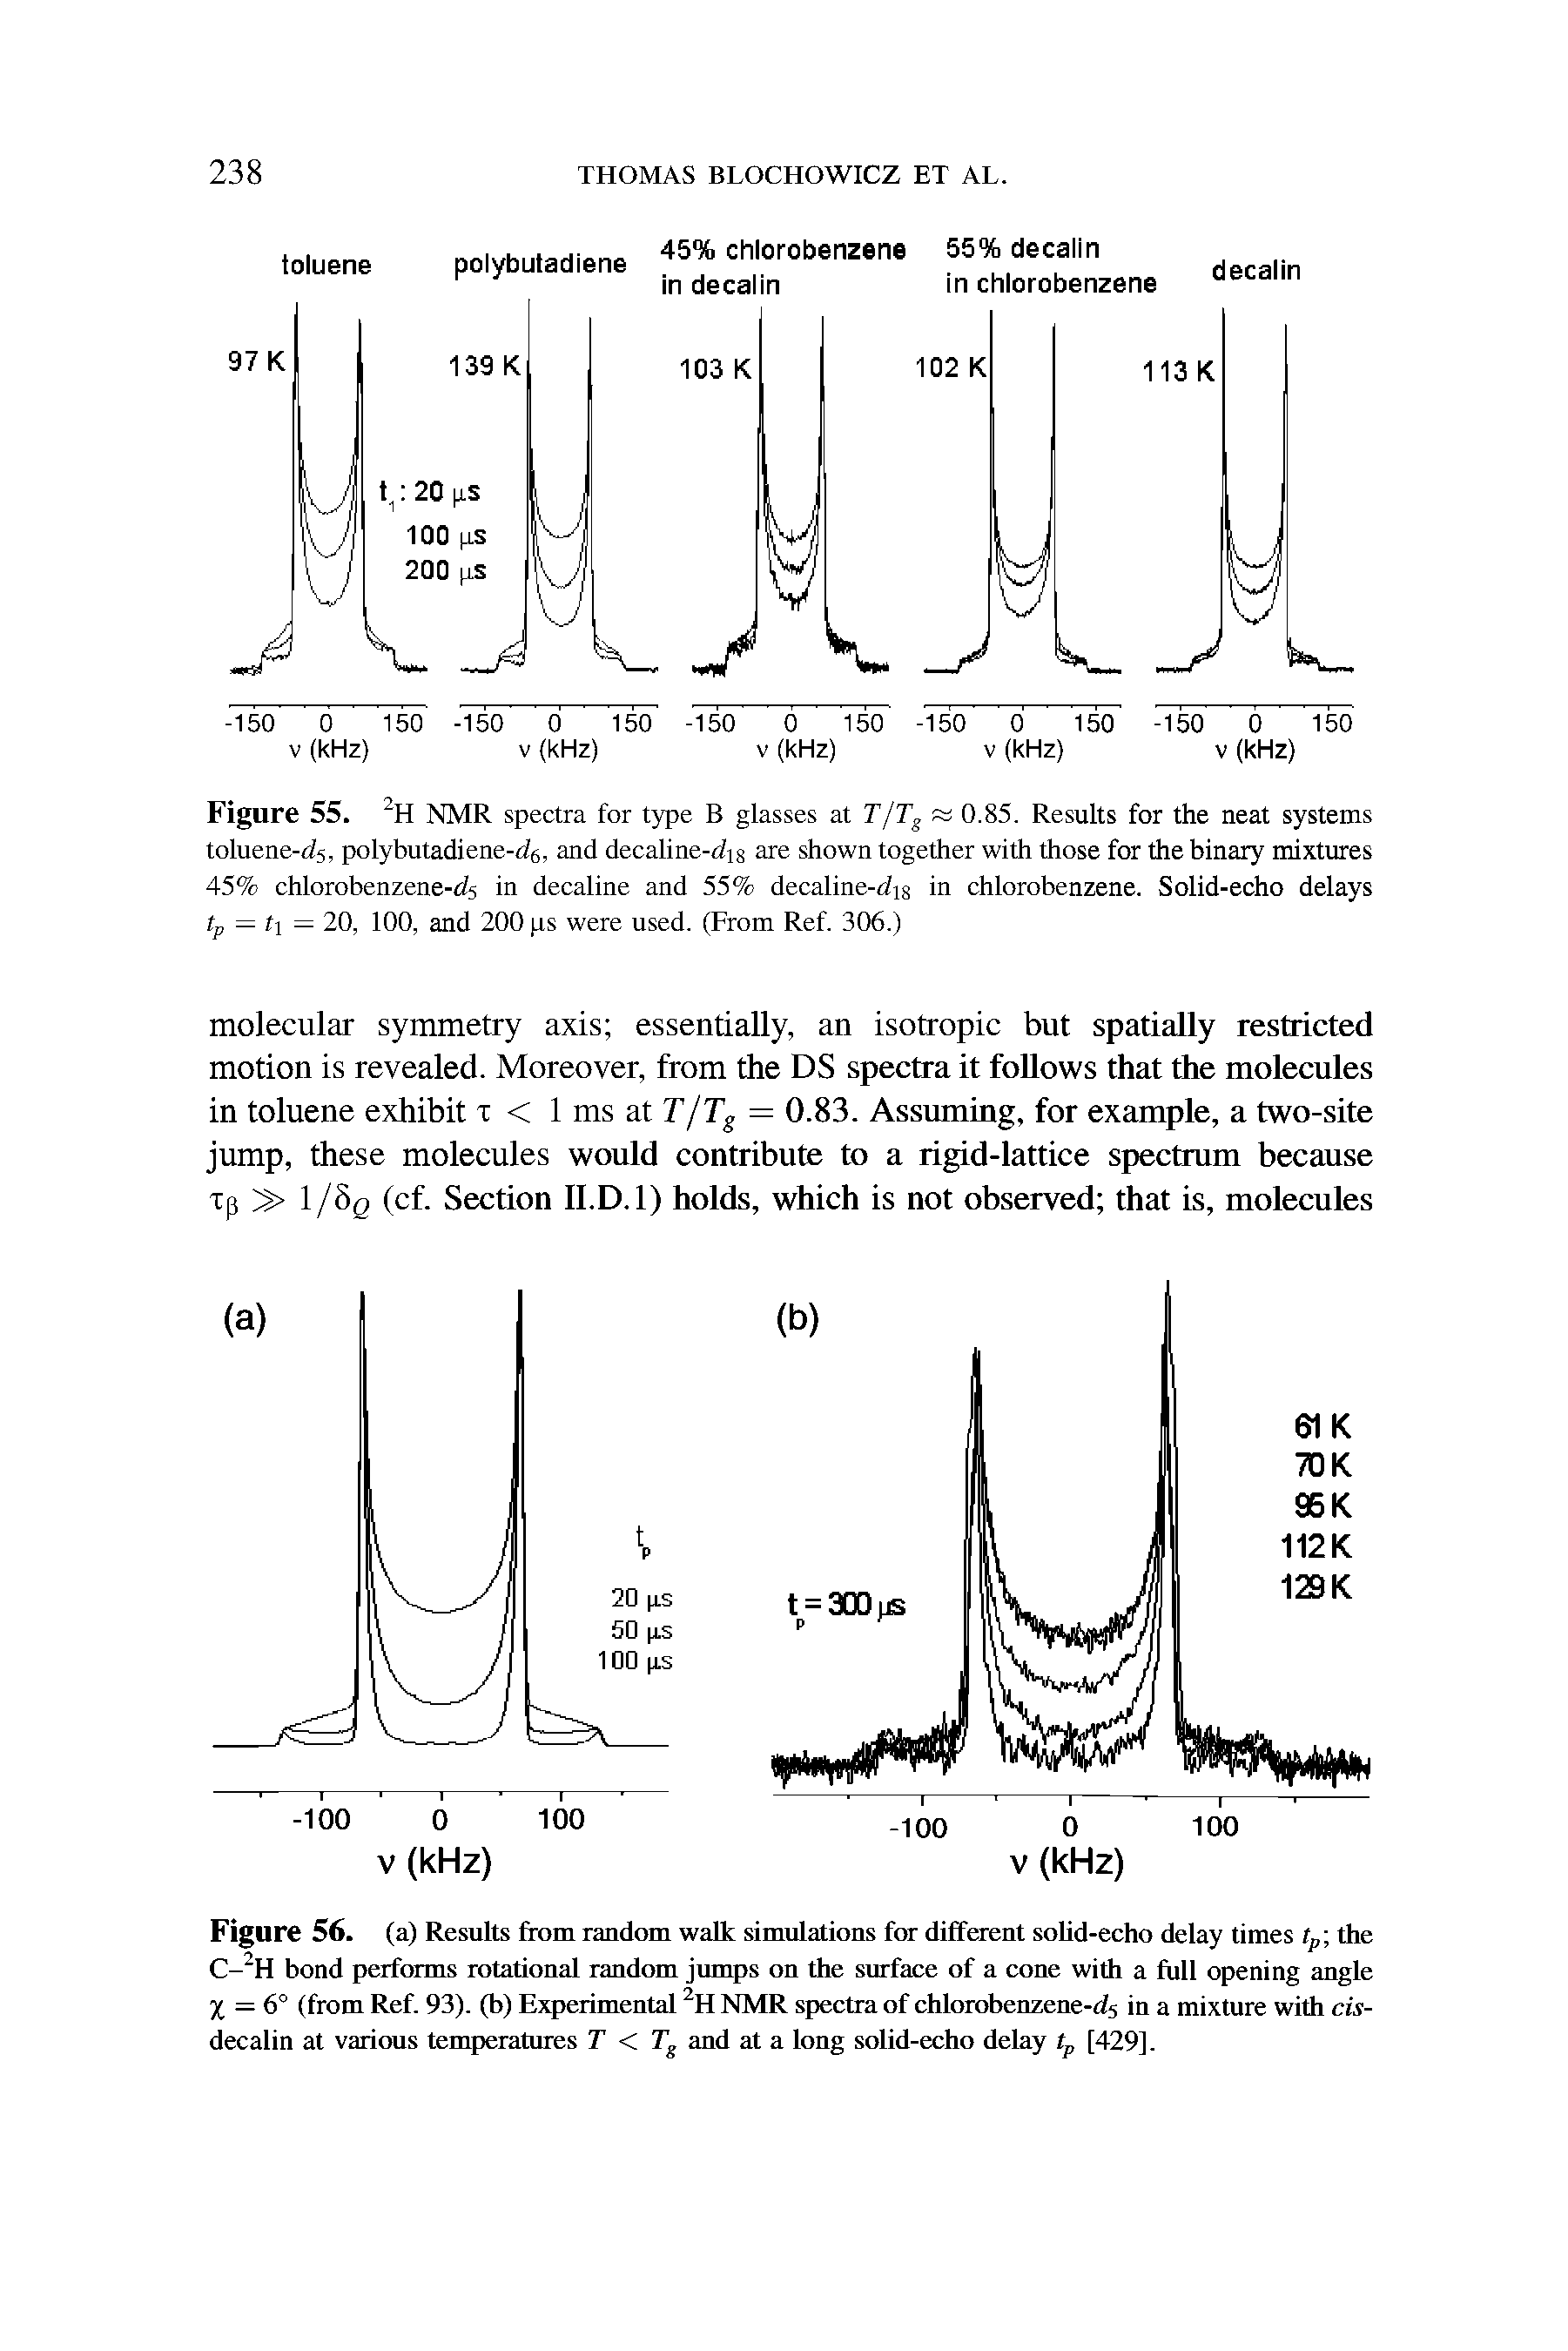 Figure 55. 2H NMR spectra for type B glasses at 777), ss 0.85. Results for the neat systems lolucncw/,. polybinadiene-7,. and decaline-7,s are shown together with those for the binary mixtures 45% chlorobenzene-<7 in decaline and 55% decalincw/, s in chlorobenzene. Solid-echo delays...